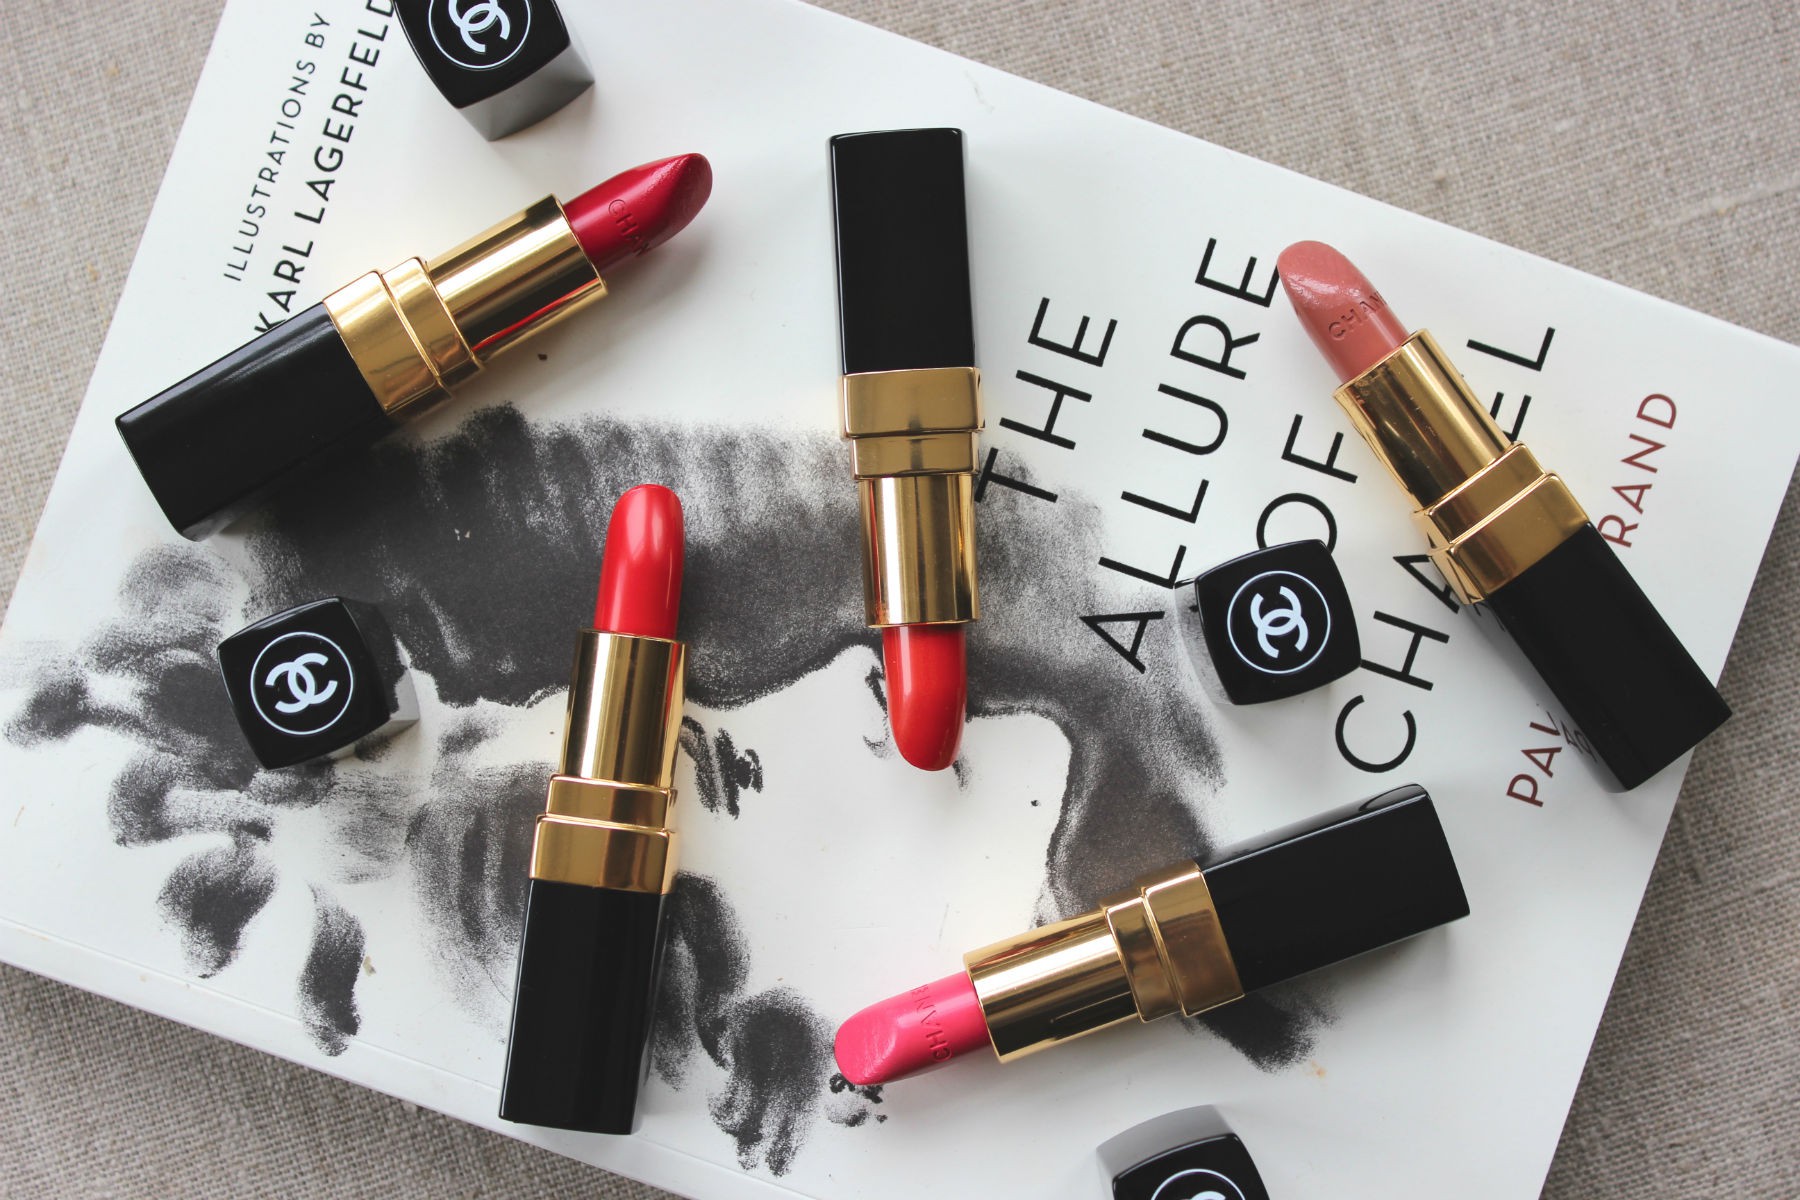 CHANEL COCO ROUGE LIPSTICKS REVIEW & SWATCHES – Lily Pebbles